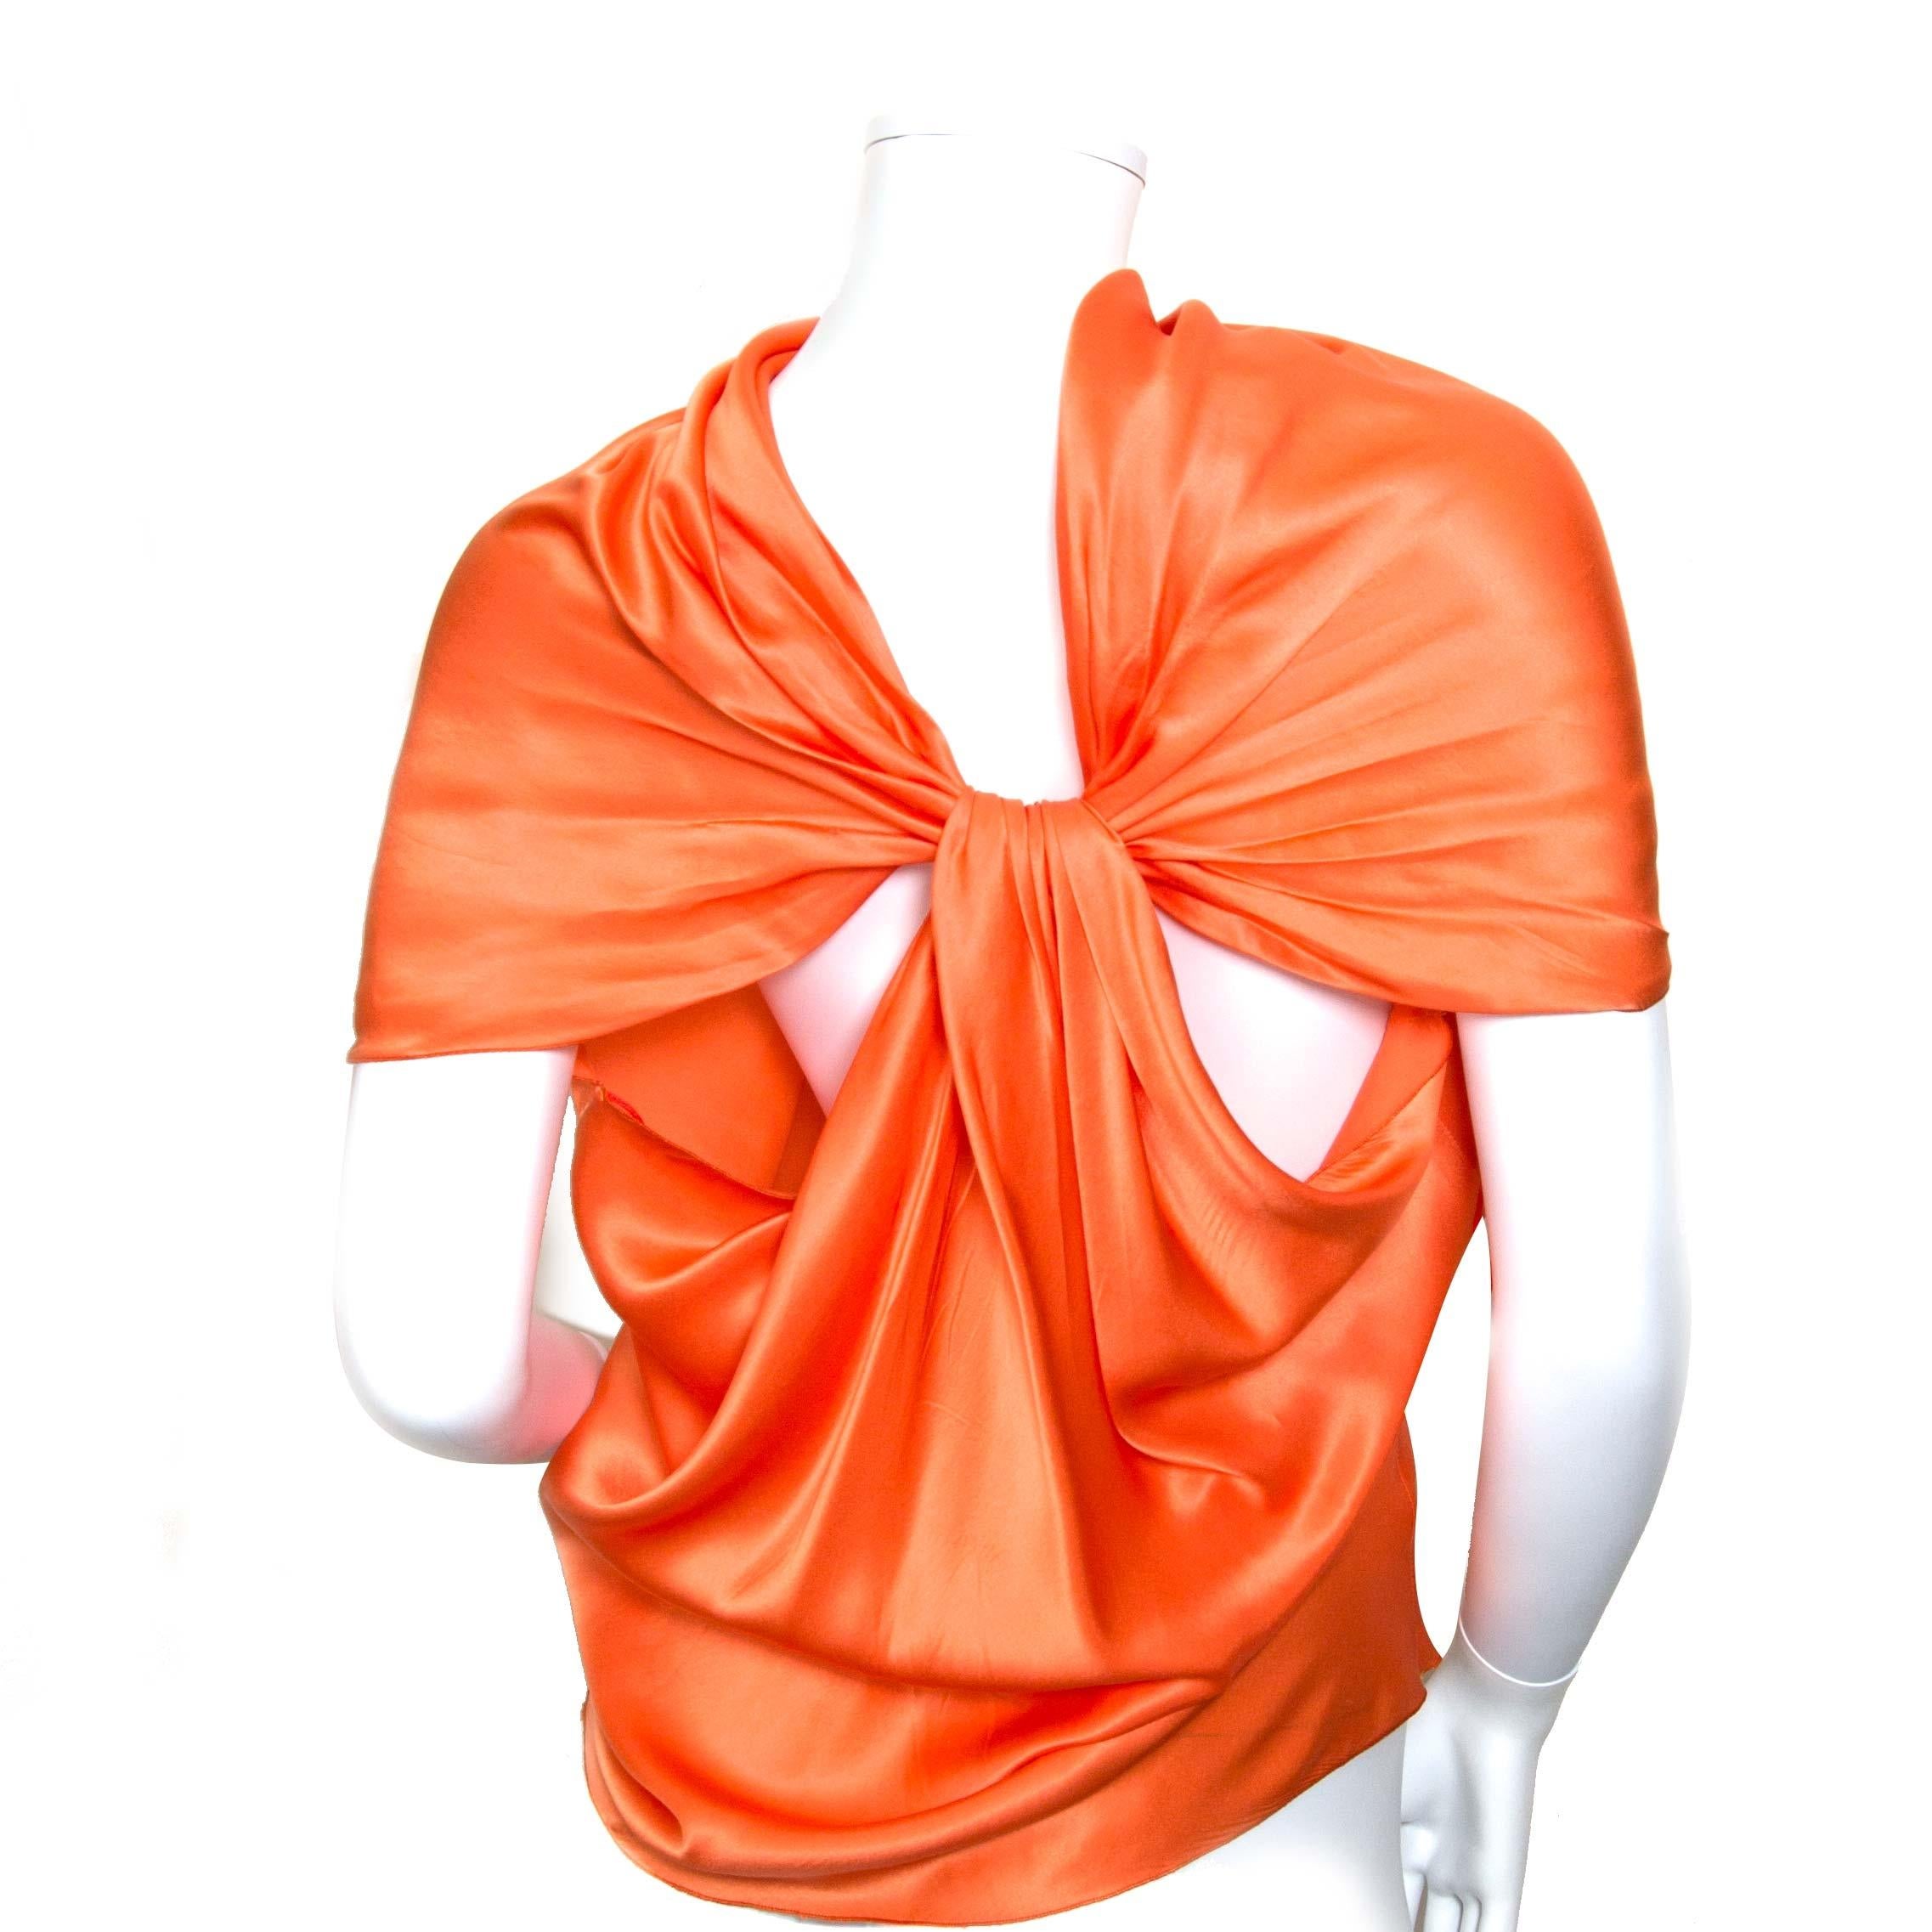 Very good condition

Lanvin Orange Silk Top

This 2010 top is perfect for hot summer days. This beautiful top is made out of 100% silk. 
The bright orange color will look beautiful on you with a nice summer tan. 